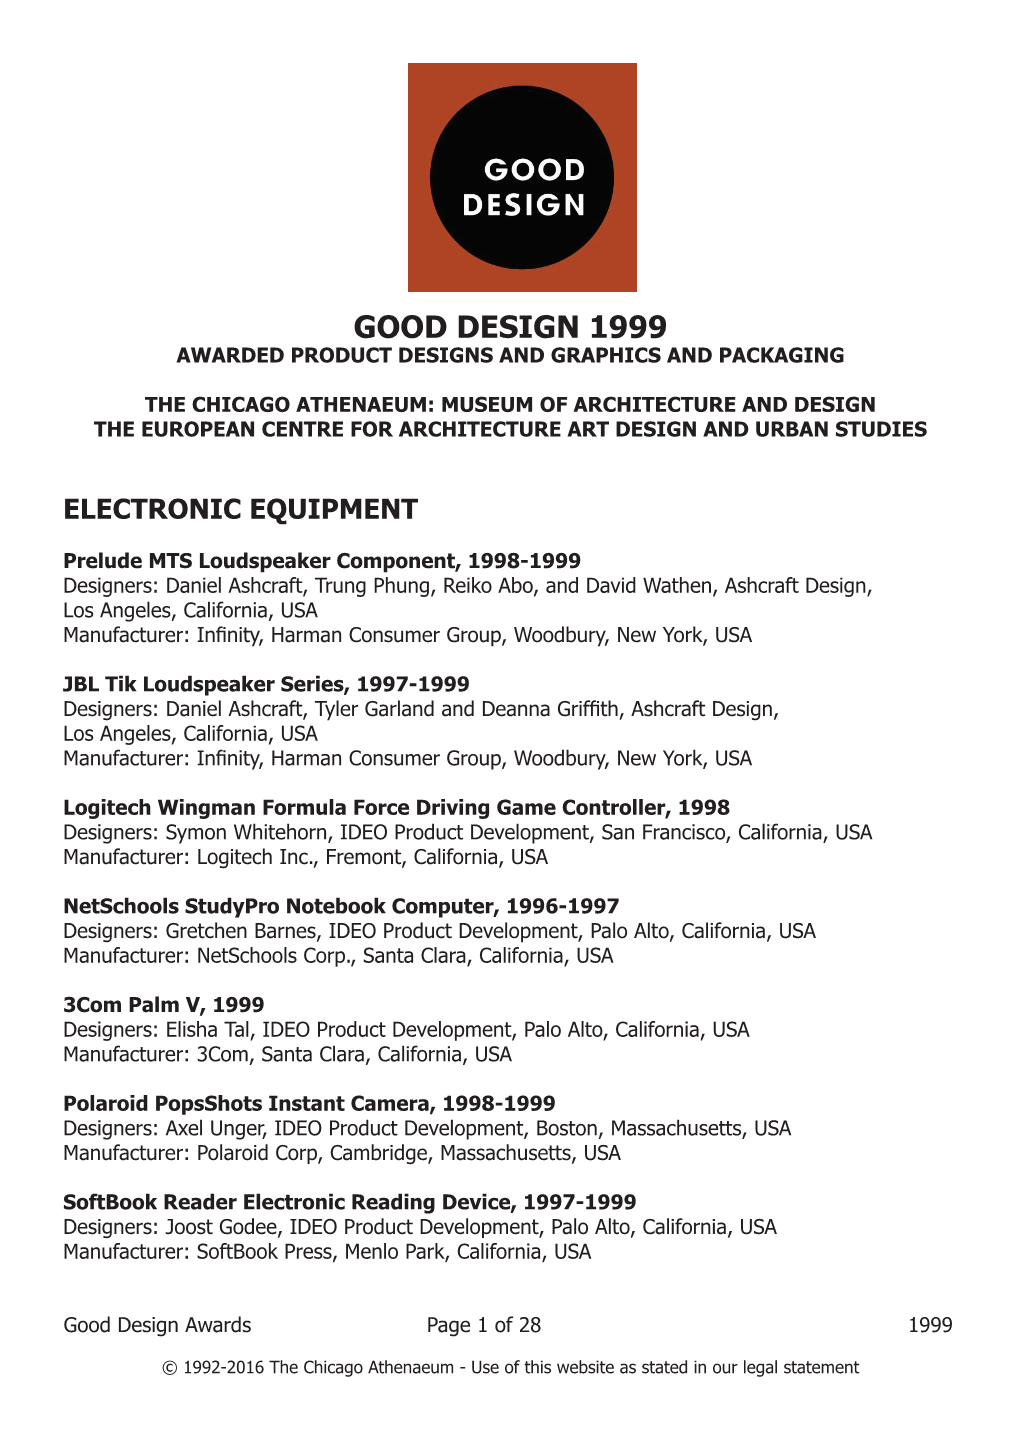 Good Design 1999 Awarded Product Designs and Graphics and Packaging